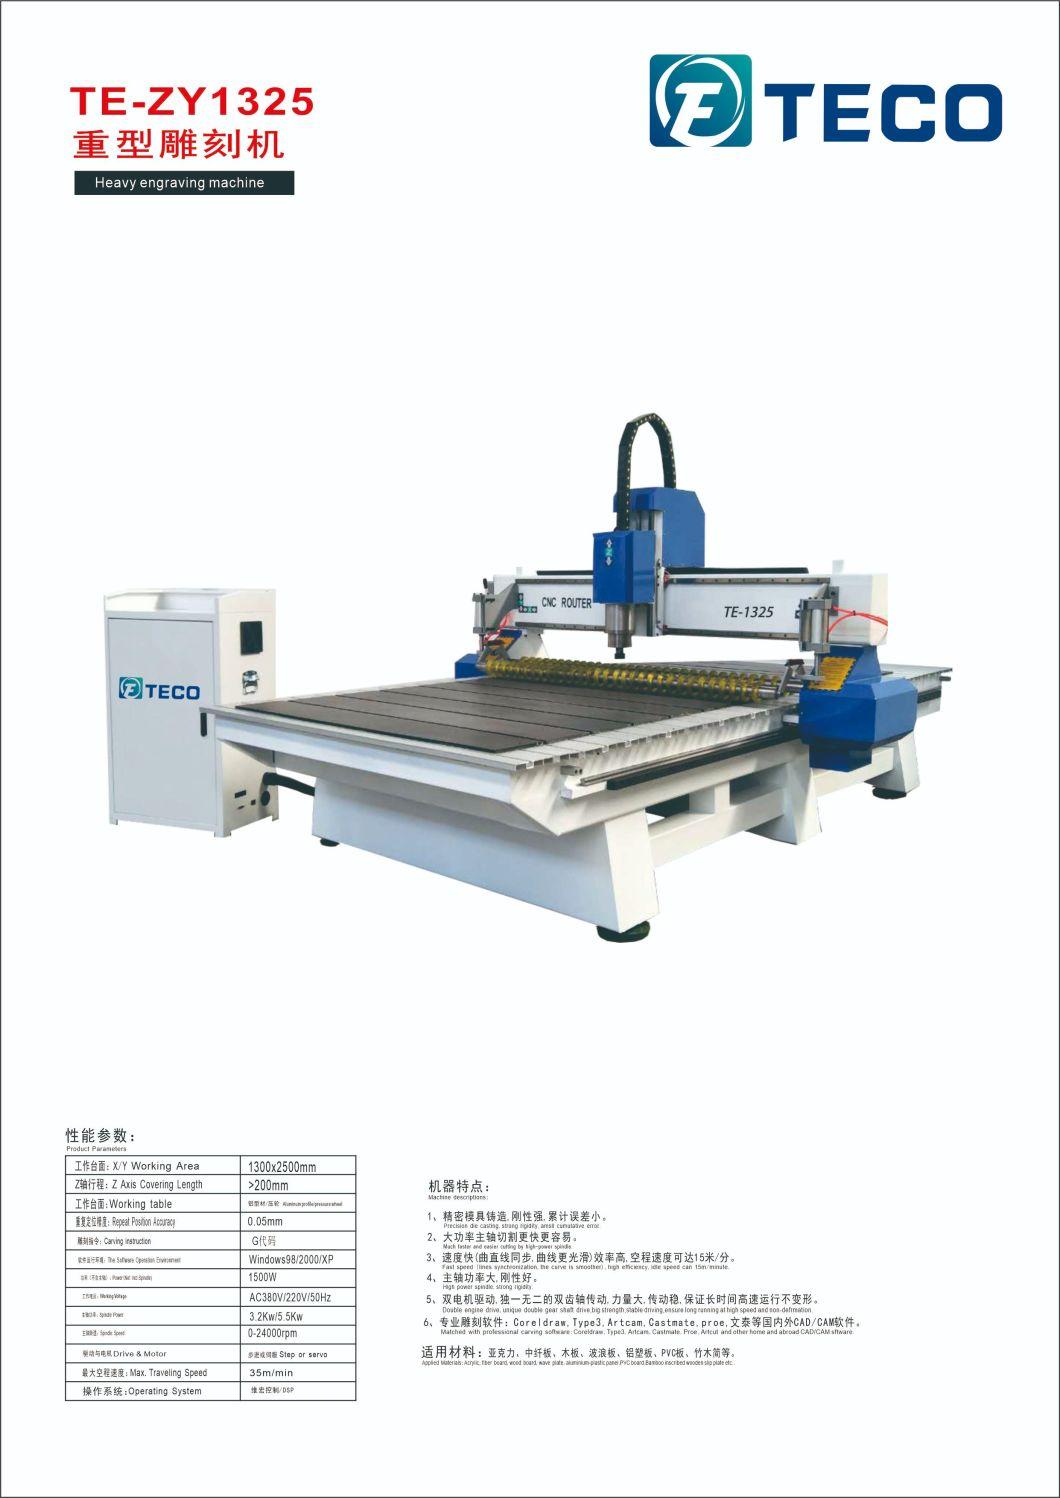 Woodworking Furniture CNC Router Advertising Wood Engraving and Cutting Machine